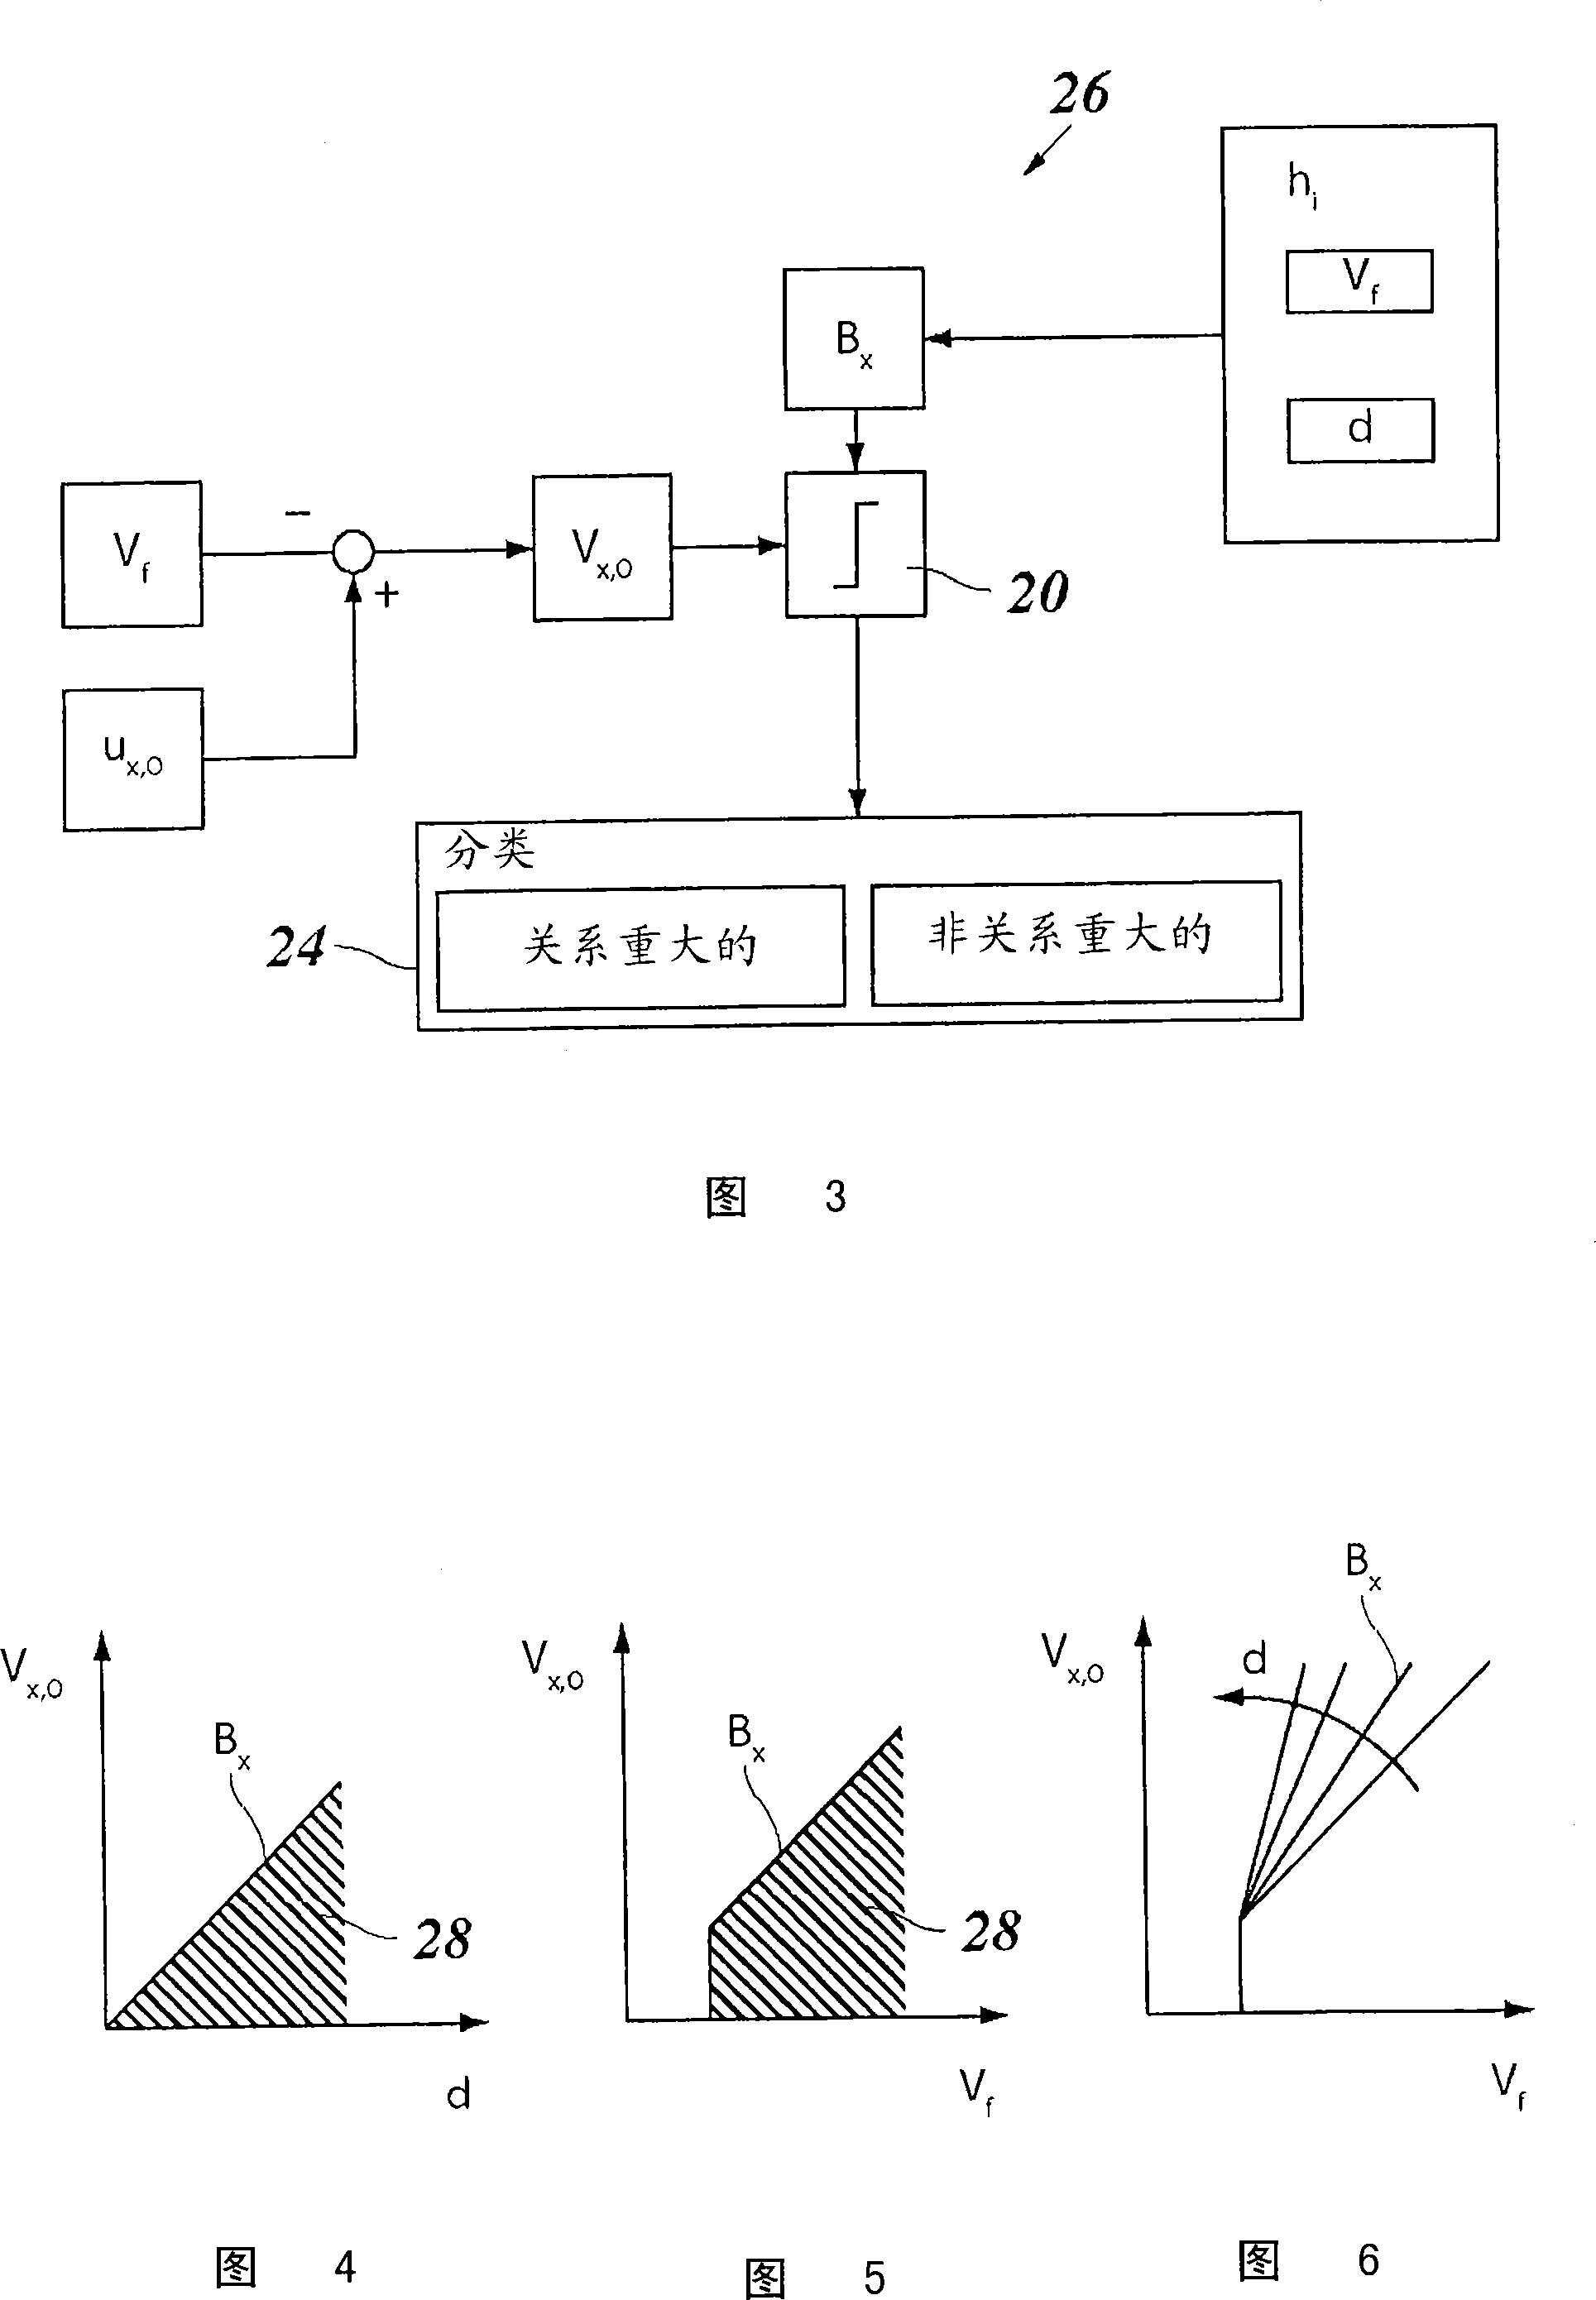 Driver assistance system comprising a device for recognizing non-moving objects